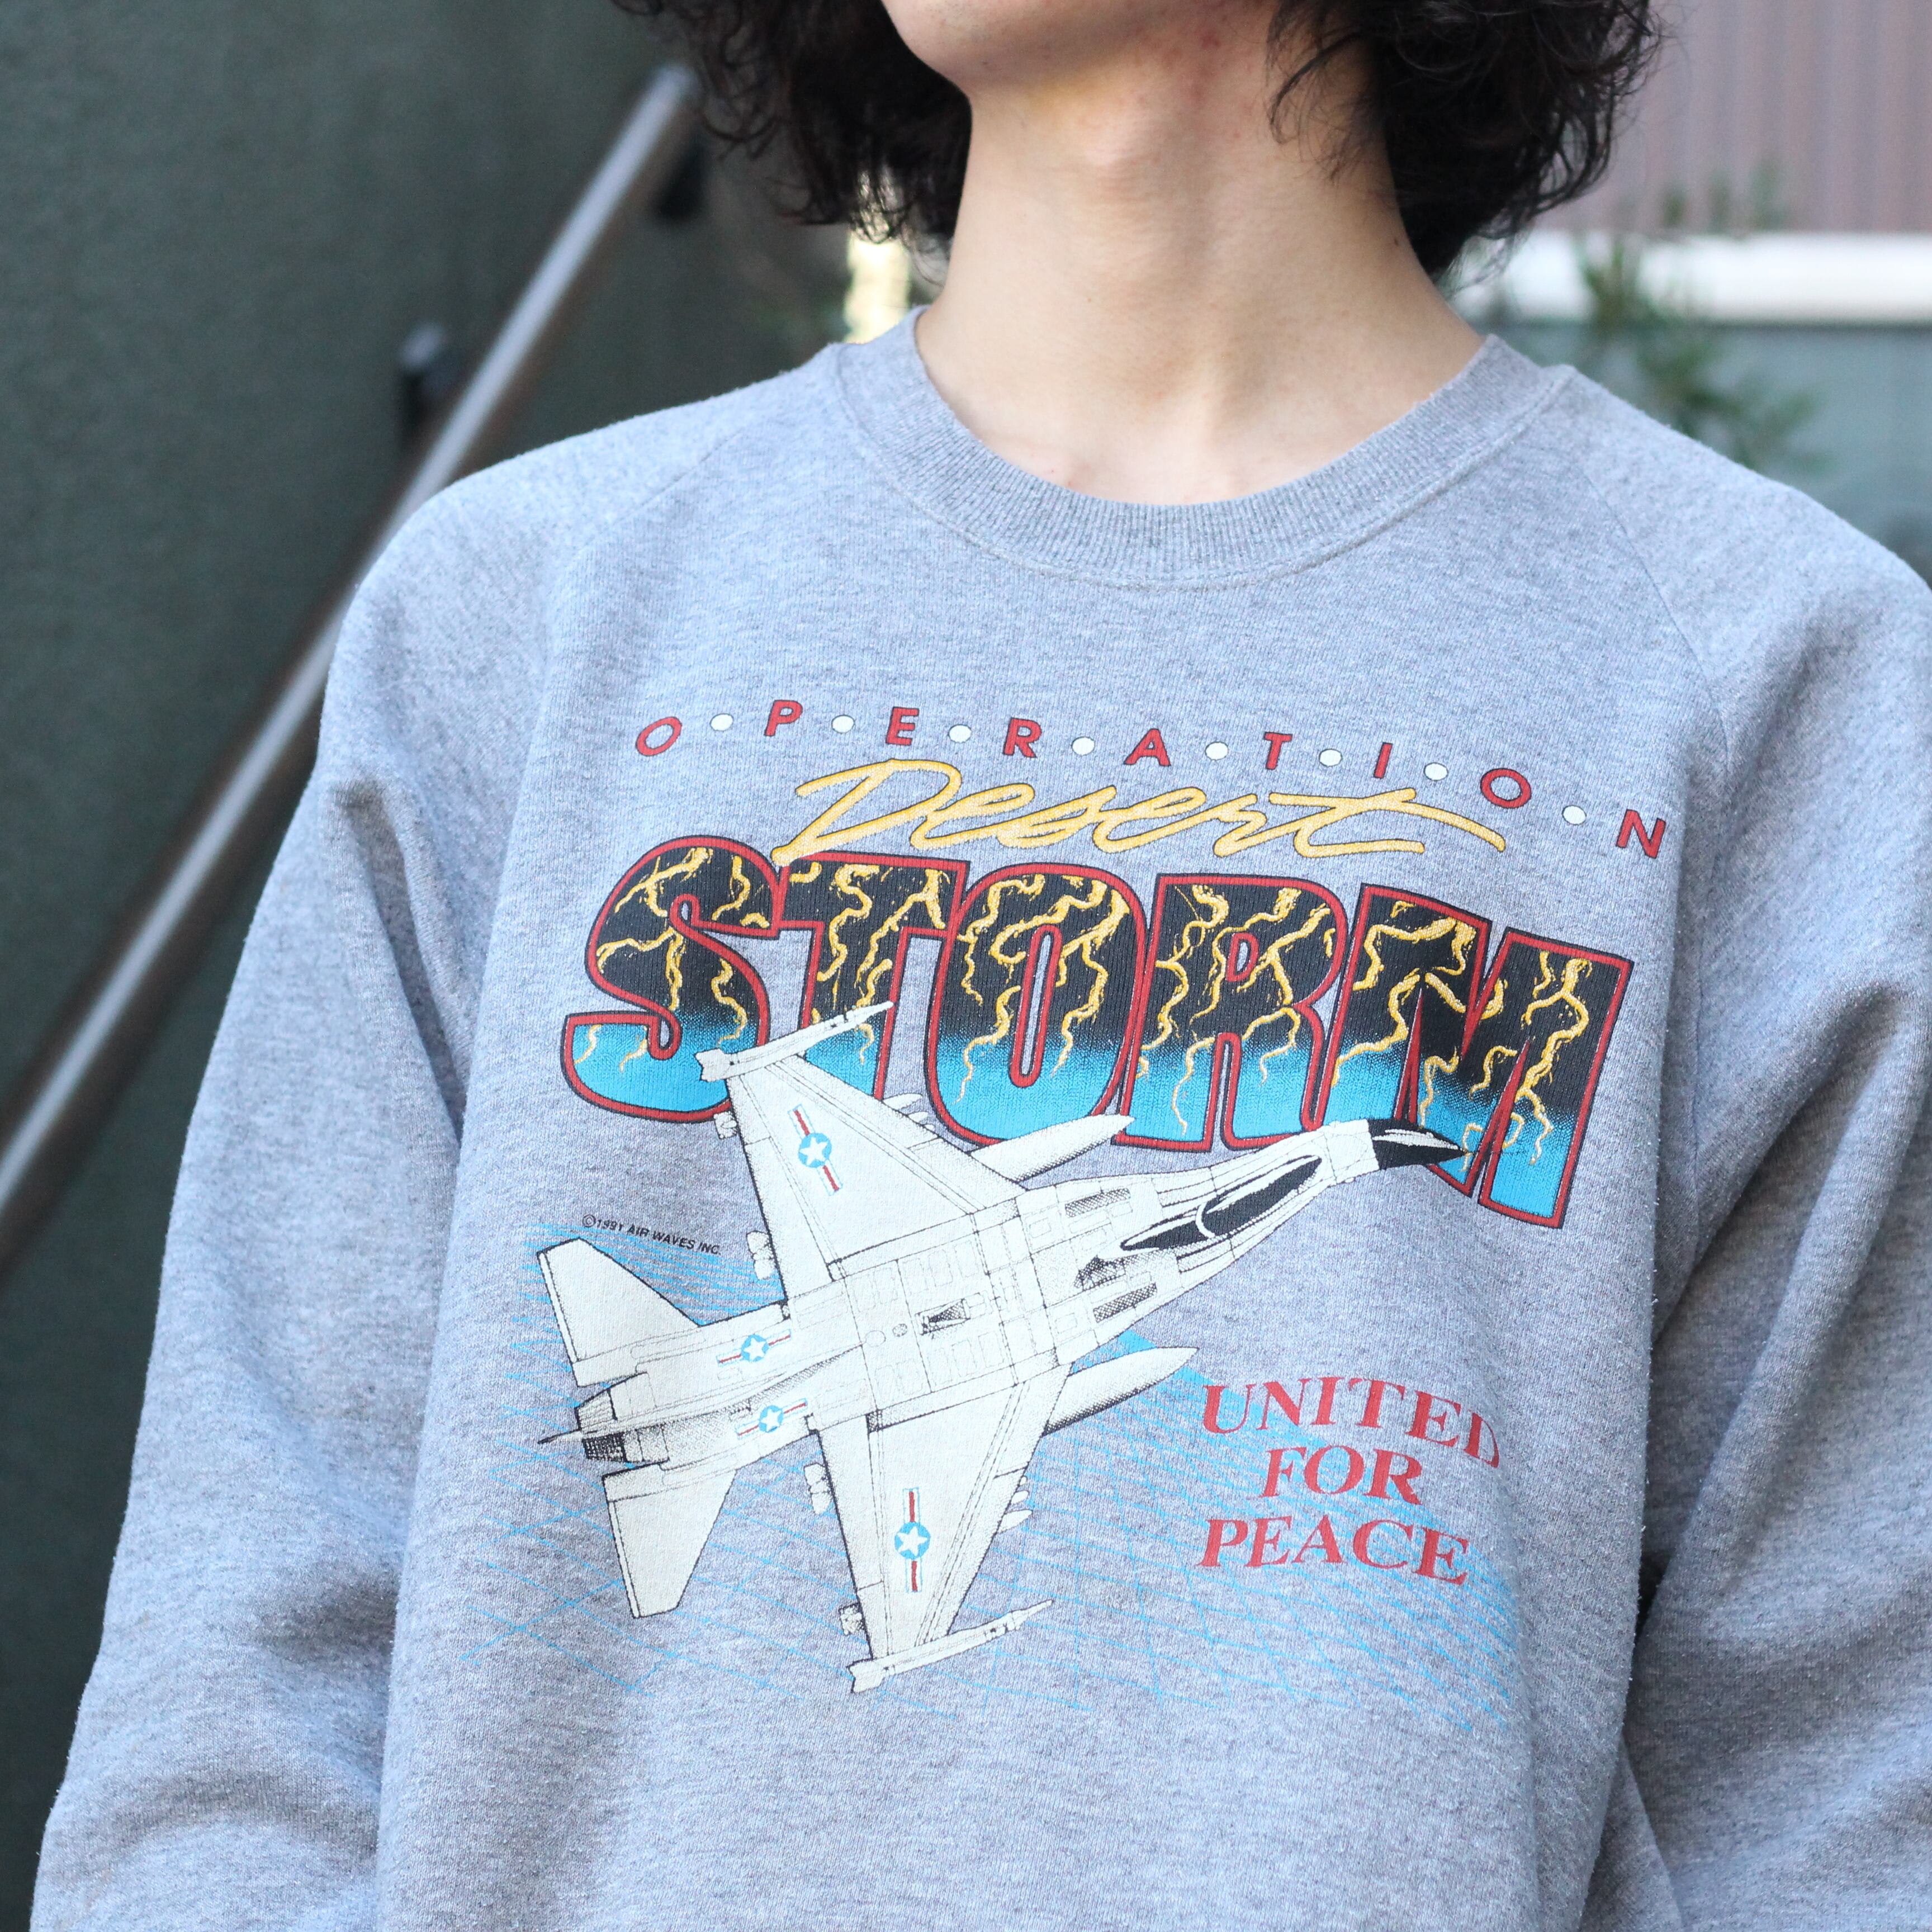 USA VINTAGE JERZEES FIGHTER PLANE DESIGN OVER SWEAT SHIRT/アメリカ